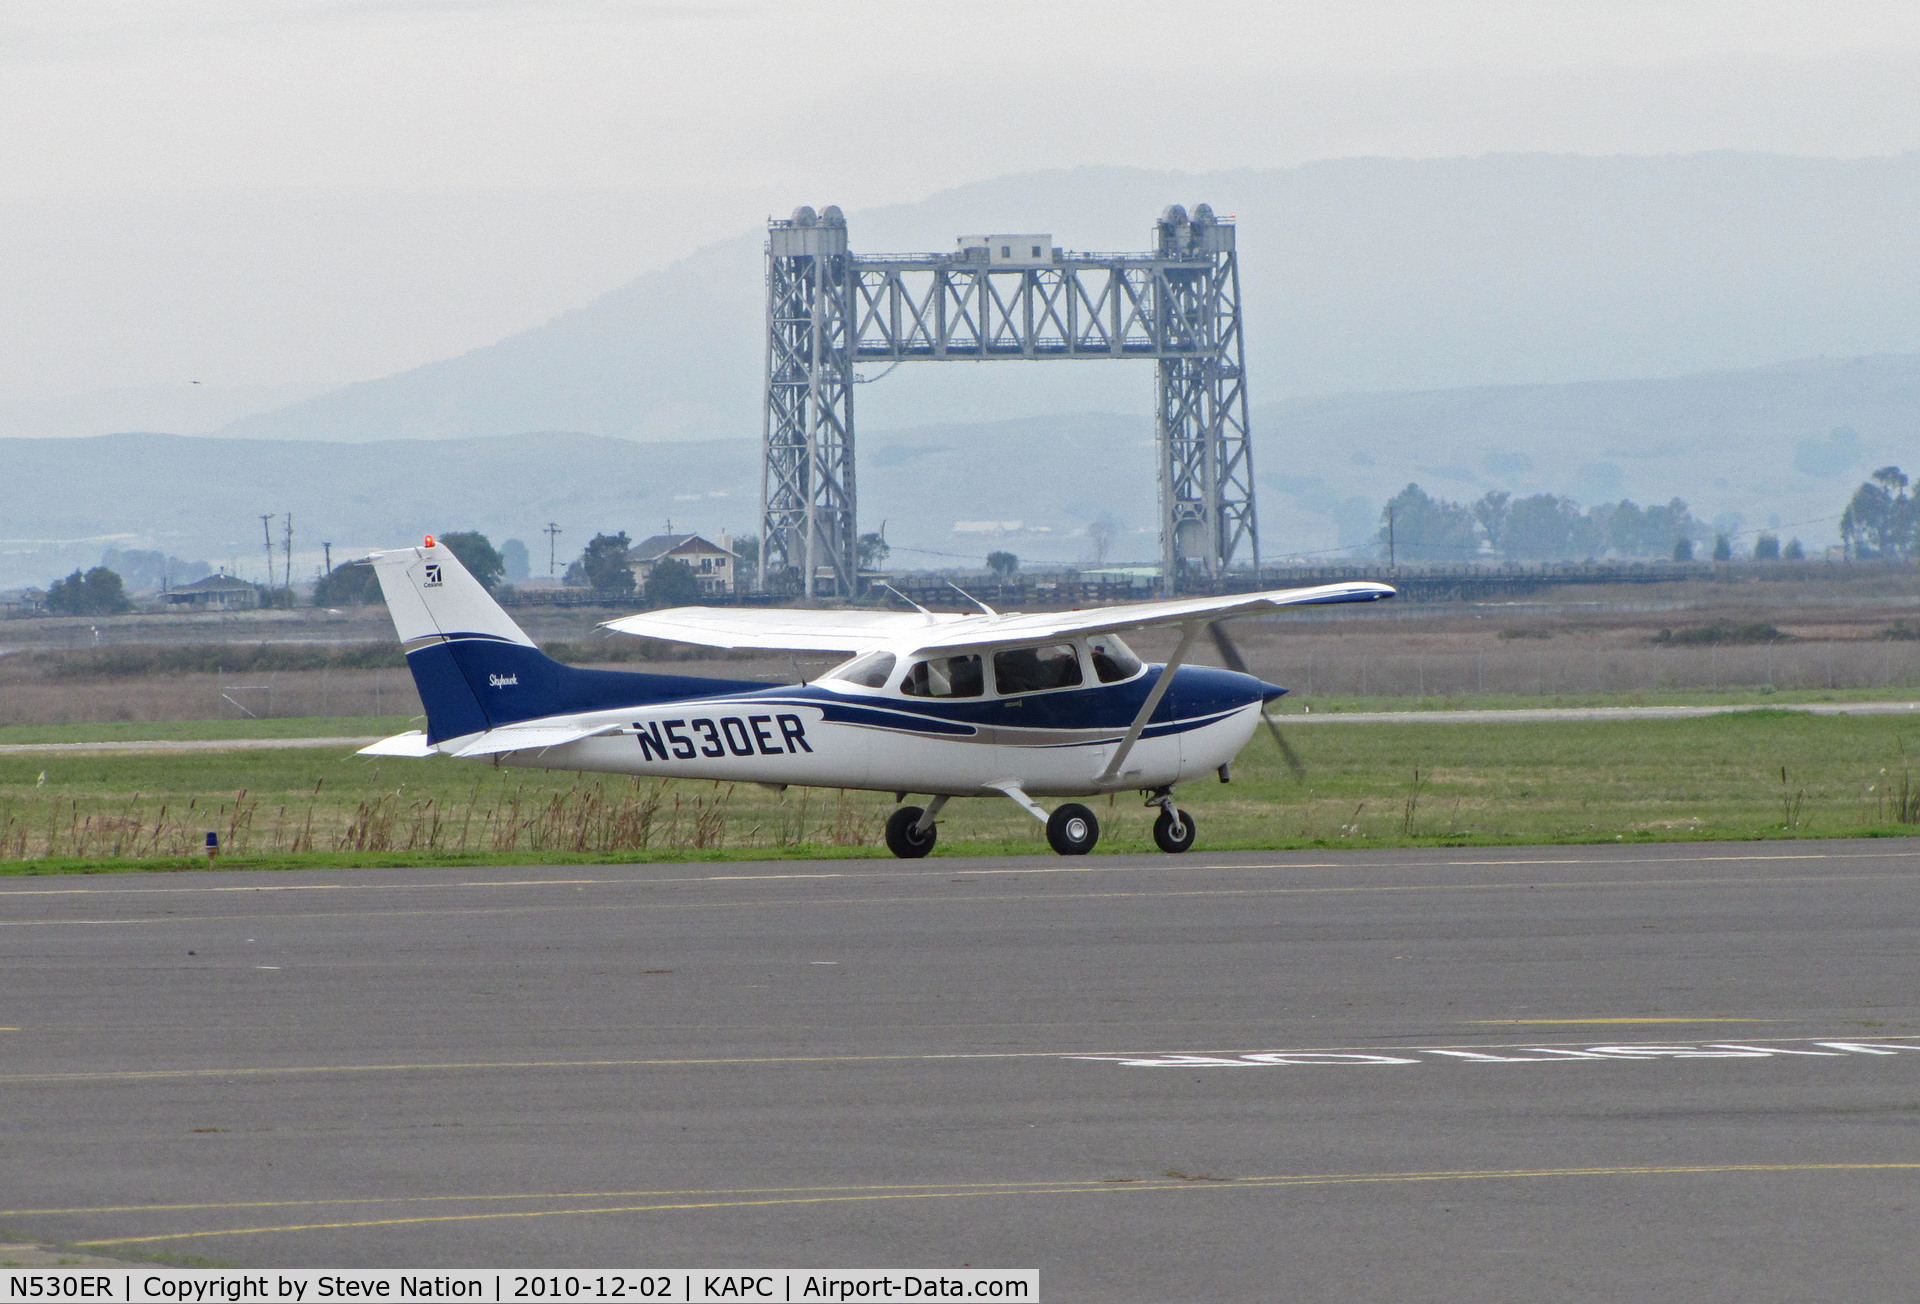 N530ER, 2002 Cessna 172S C/N 172S9113, Bacchus Aviation (Sonoma Skypark, CA) 2002 Cessna 172S taxis with Napa River RR Bridge in background @ Napa County Airport, CA